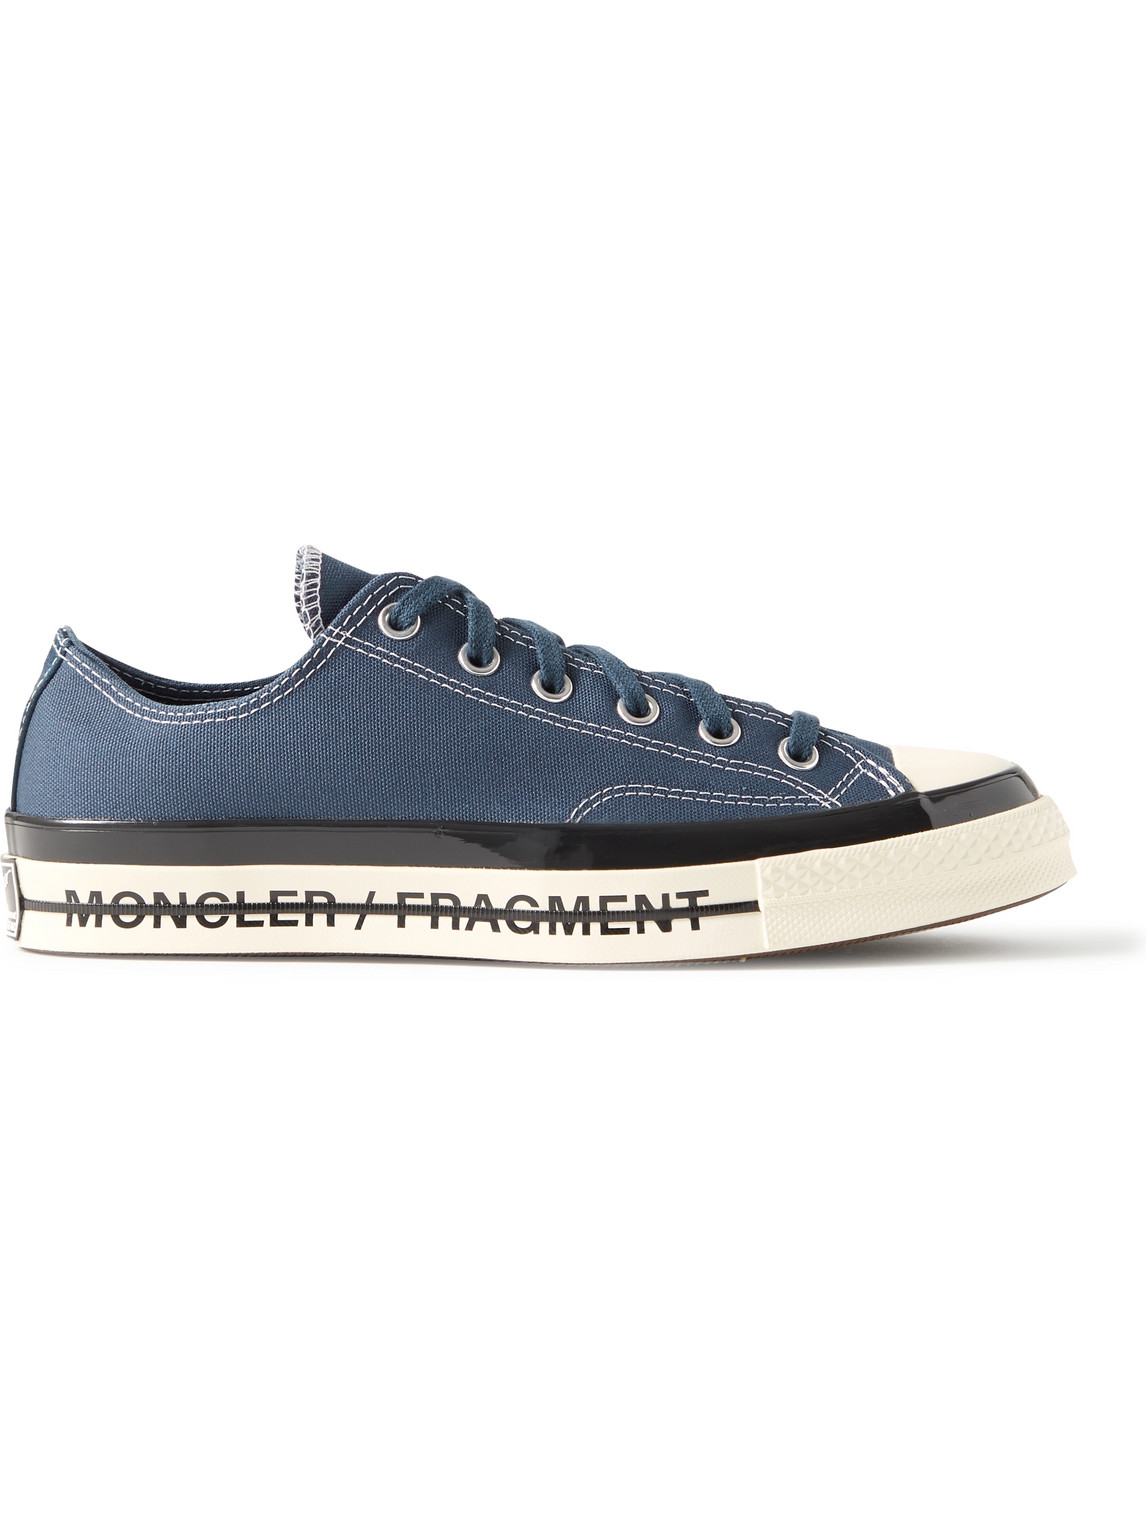 Moncler Converse 7  Fragment Fraylor Iii Canvas Trainers In Blue